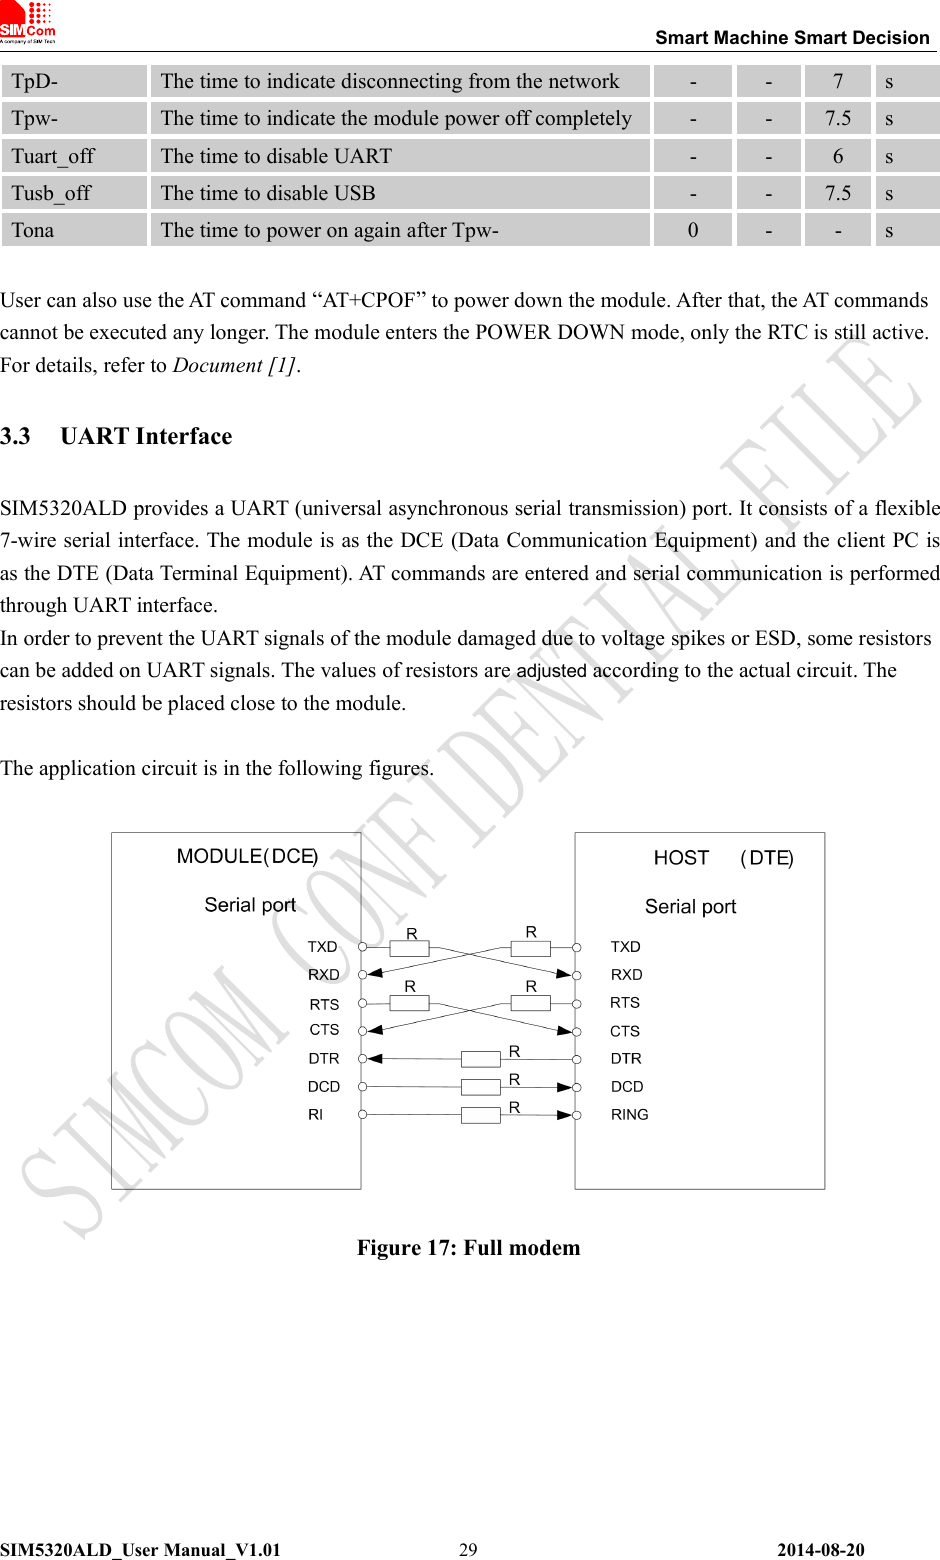 Smart Machine Smart DecisionSIM5320ALD_User Manual_V1.01 2014-08-2029TpD- The time to indicate disconnecting from the network - - 7 sTpw- The time to indicate the module power off completely - - 7.5 sTuart_off The time to disable UART - - 6 sTusb_off The time to disable USB - - 7.5 sTona The time to power on again after Tpw- 0 - - sUser can also use the AT command “AT+CPOF”to power down the module. After that, the AT commandscannot be executed any longer. The module enters the POWER DOWN mode, only the RTC is still active.For details, refer to Document [1].3.3 UART InterfaceSIM5320ALD provides a UART (universal asynchronous serial transmission) port. It consists of a flexible7-wire serial interface. The module is as the DCE (Data Communication Equipment) and the client PC isas the DTE (Data Terminal Equipment). AT commands are entered and serial communication is performedthrough UART interface.In order to prevent the UART signals of the module damaged due to voltage spikes or ESD, some resistorscan be added on UART signals. The values of resistors are adjusted according to the actual circuit. Theresistors should be placed close to the module.The application circuit is in the following figures.Figure 17: Full modem